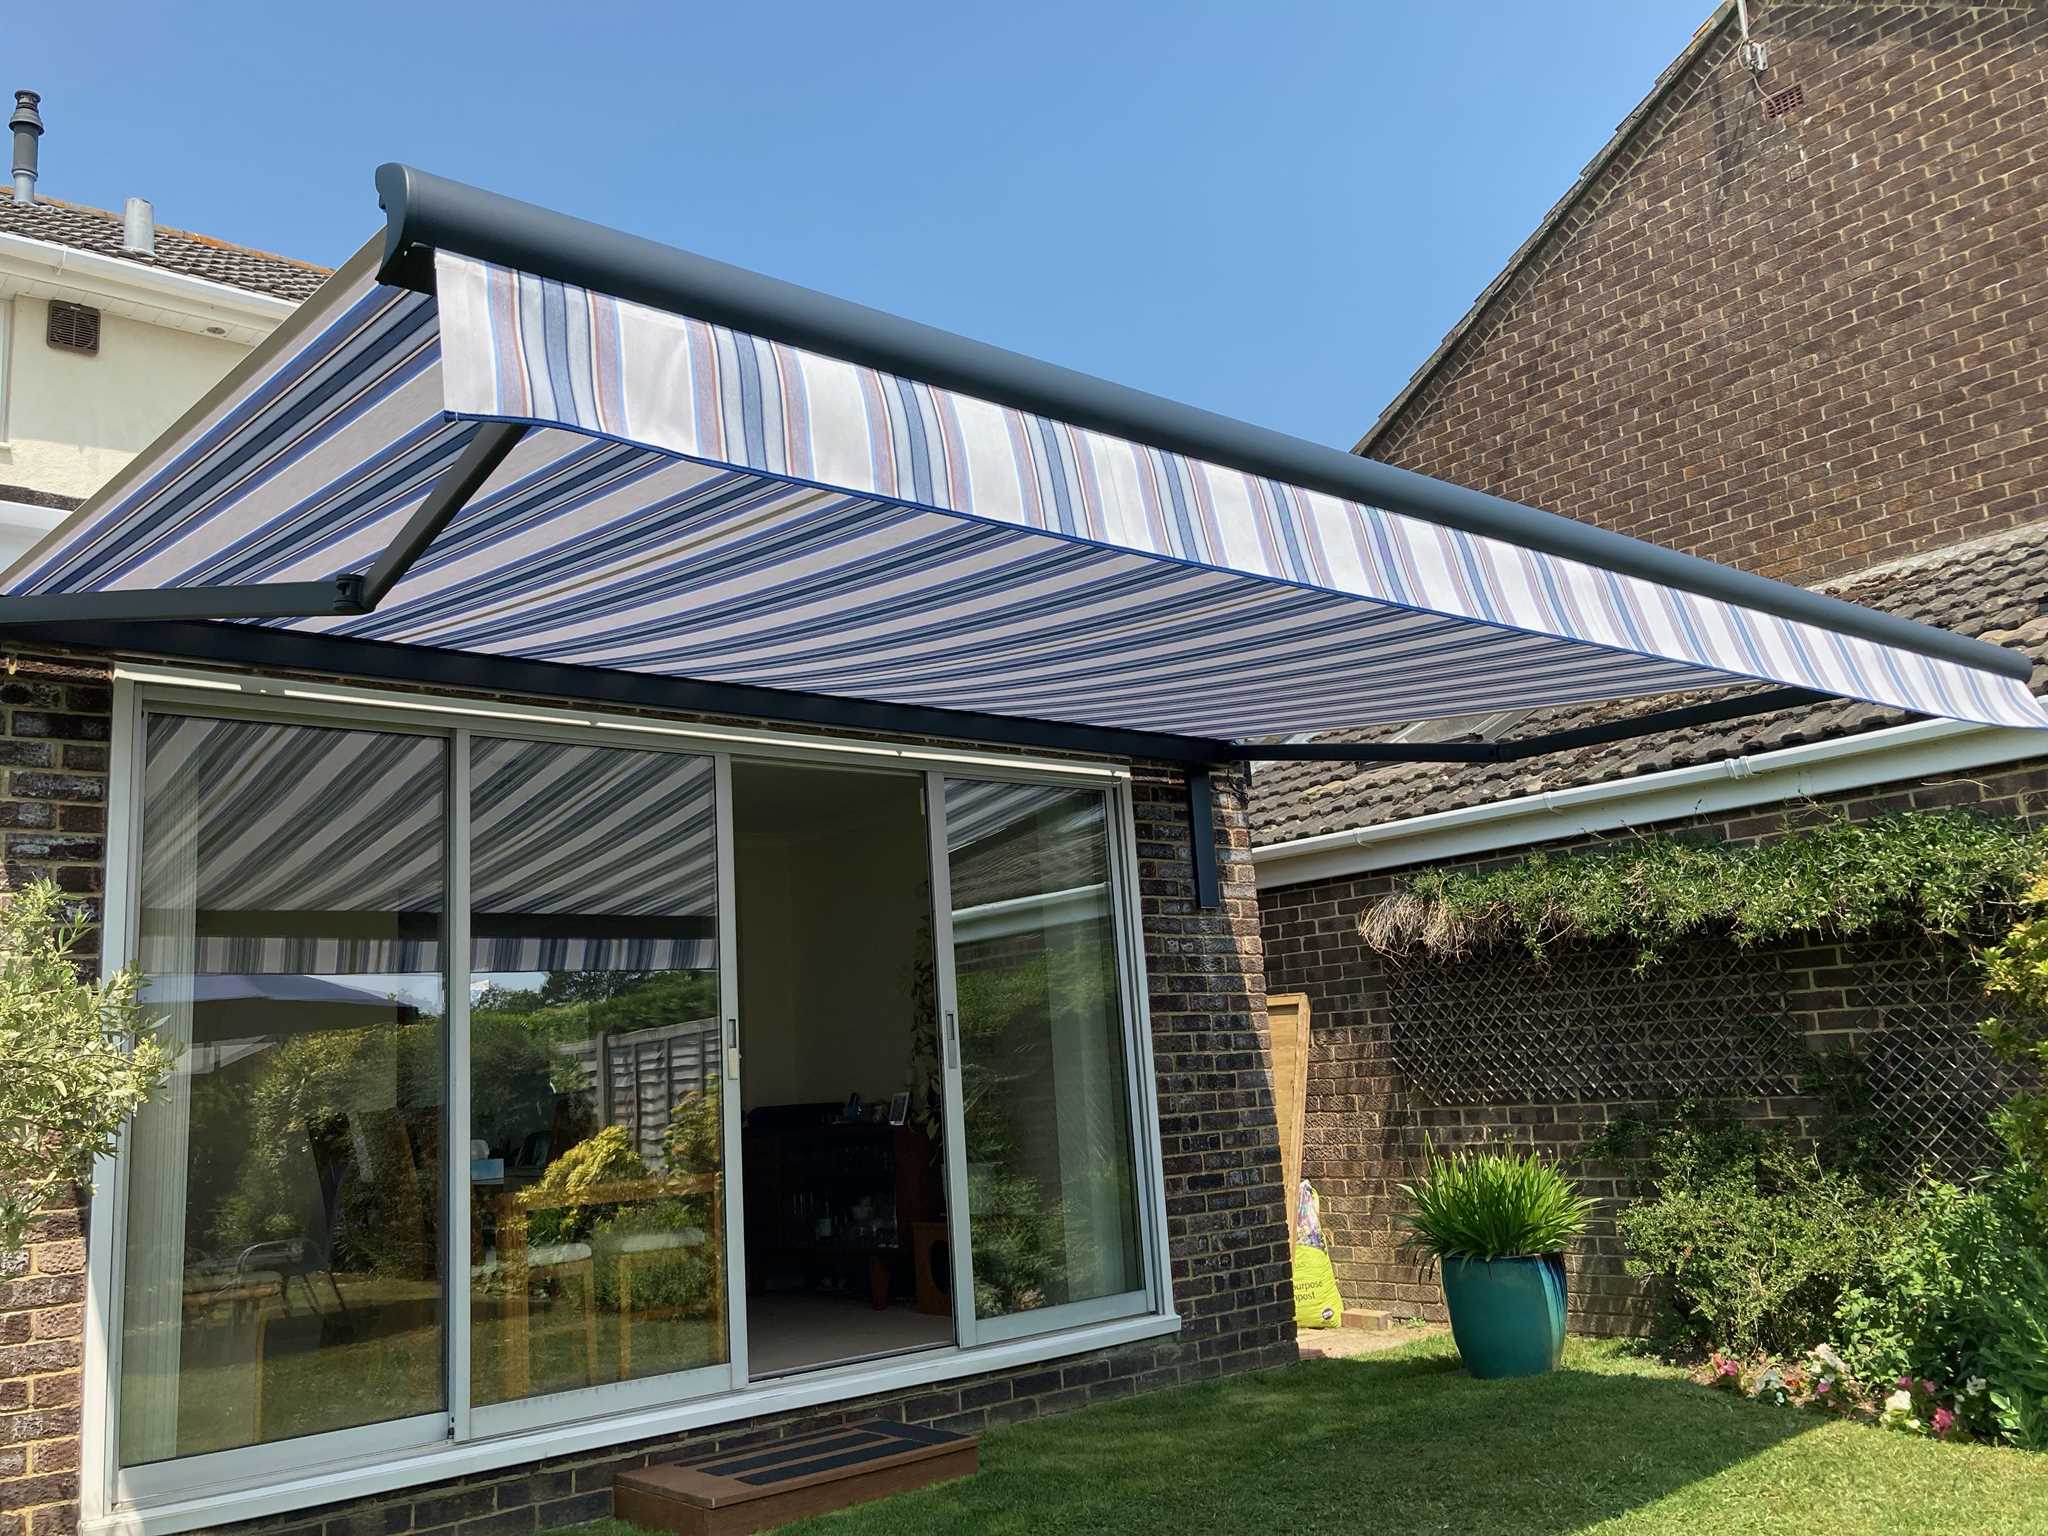 Awning with stripes